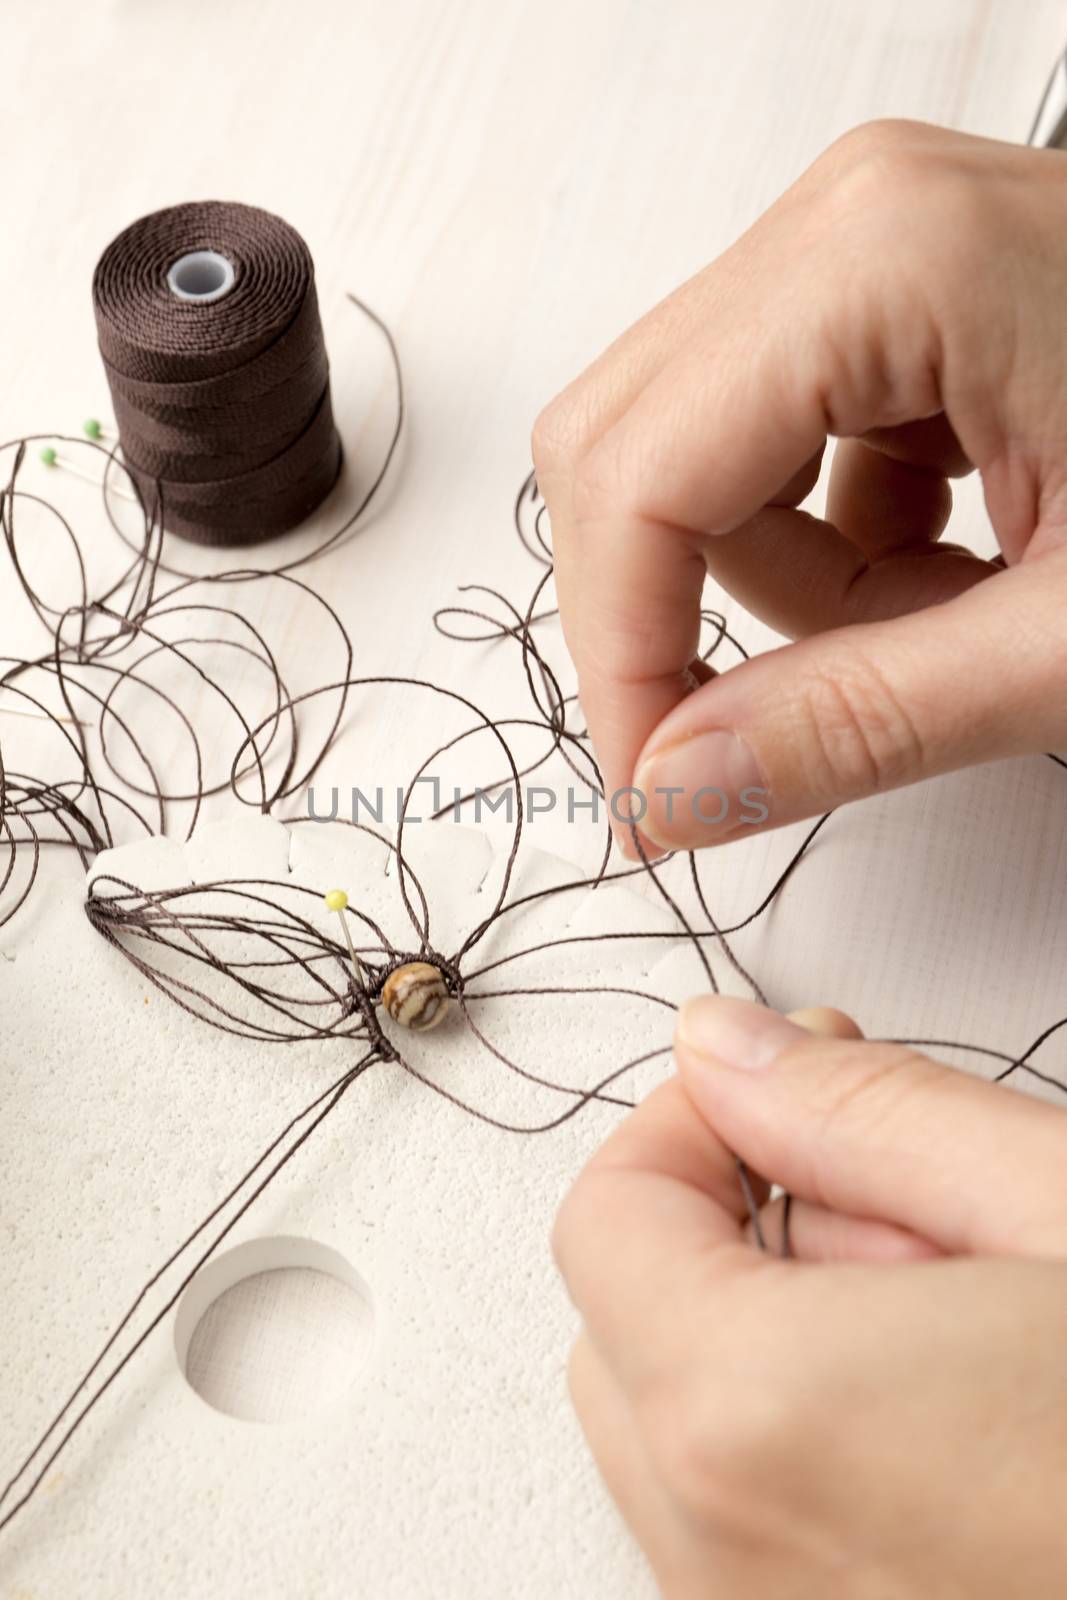 Lifestyle concept, reinvent your life and your job: close-up detail of woman hands making macrame knotted jewel with the fingers that tie the nylon thread around the diaspro natural stone